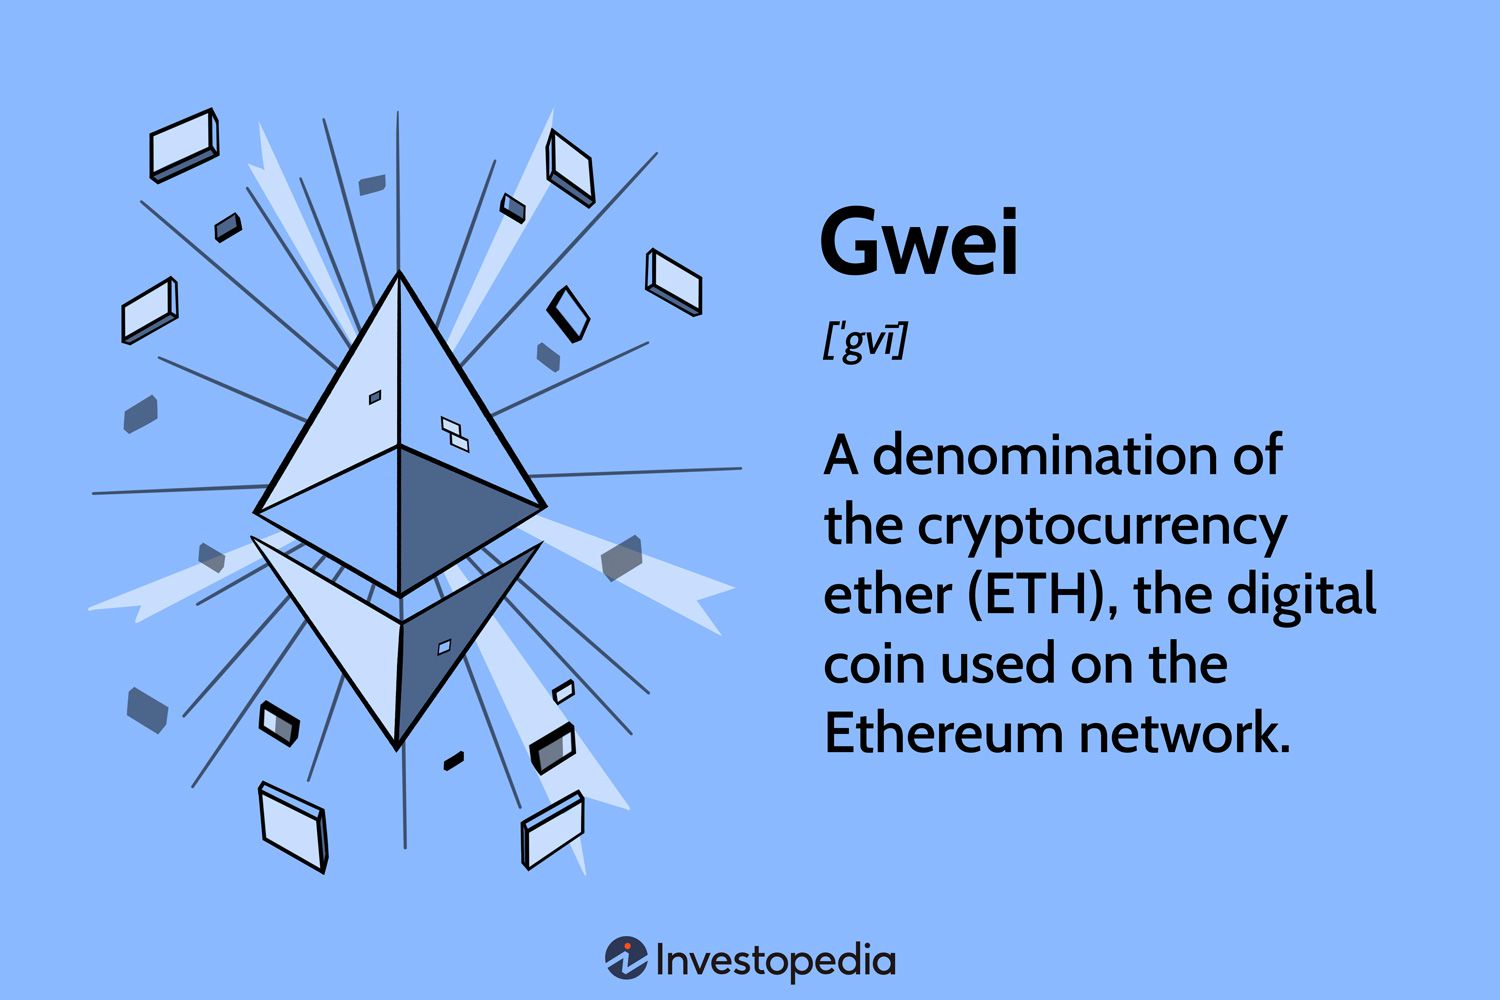 From stETH to wETH to Gwei: Understanding the Ethereum Ecosystem